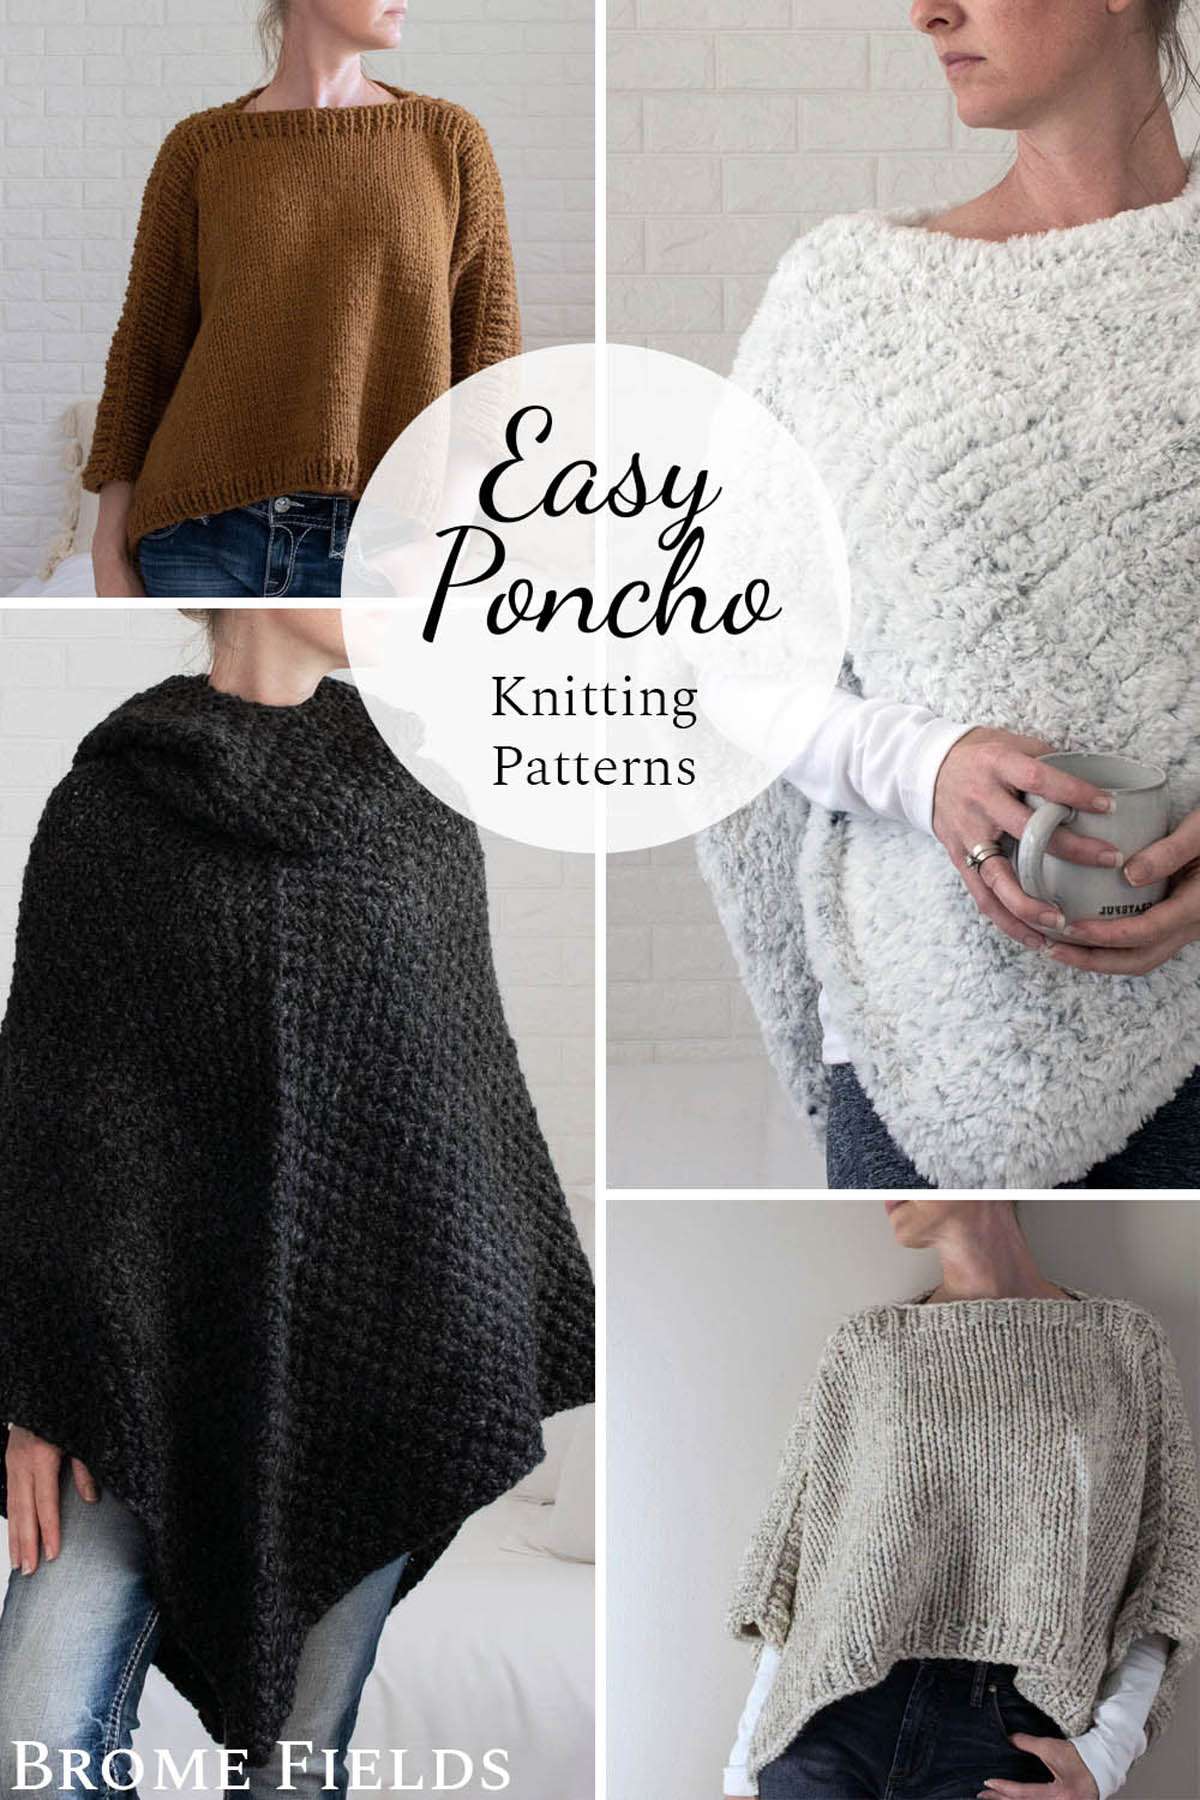 Cable Poncho Knitting Tutorial - Beginner 